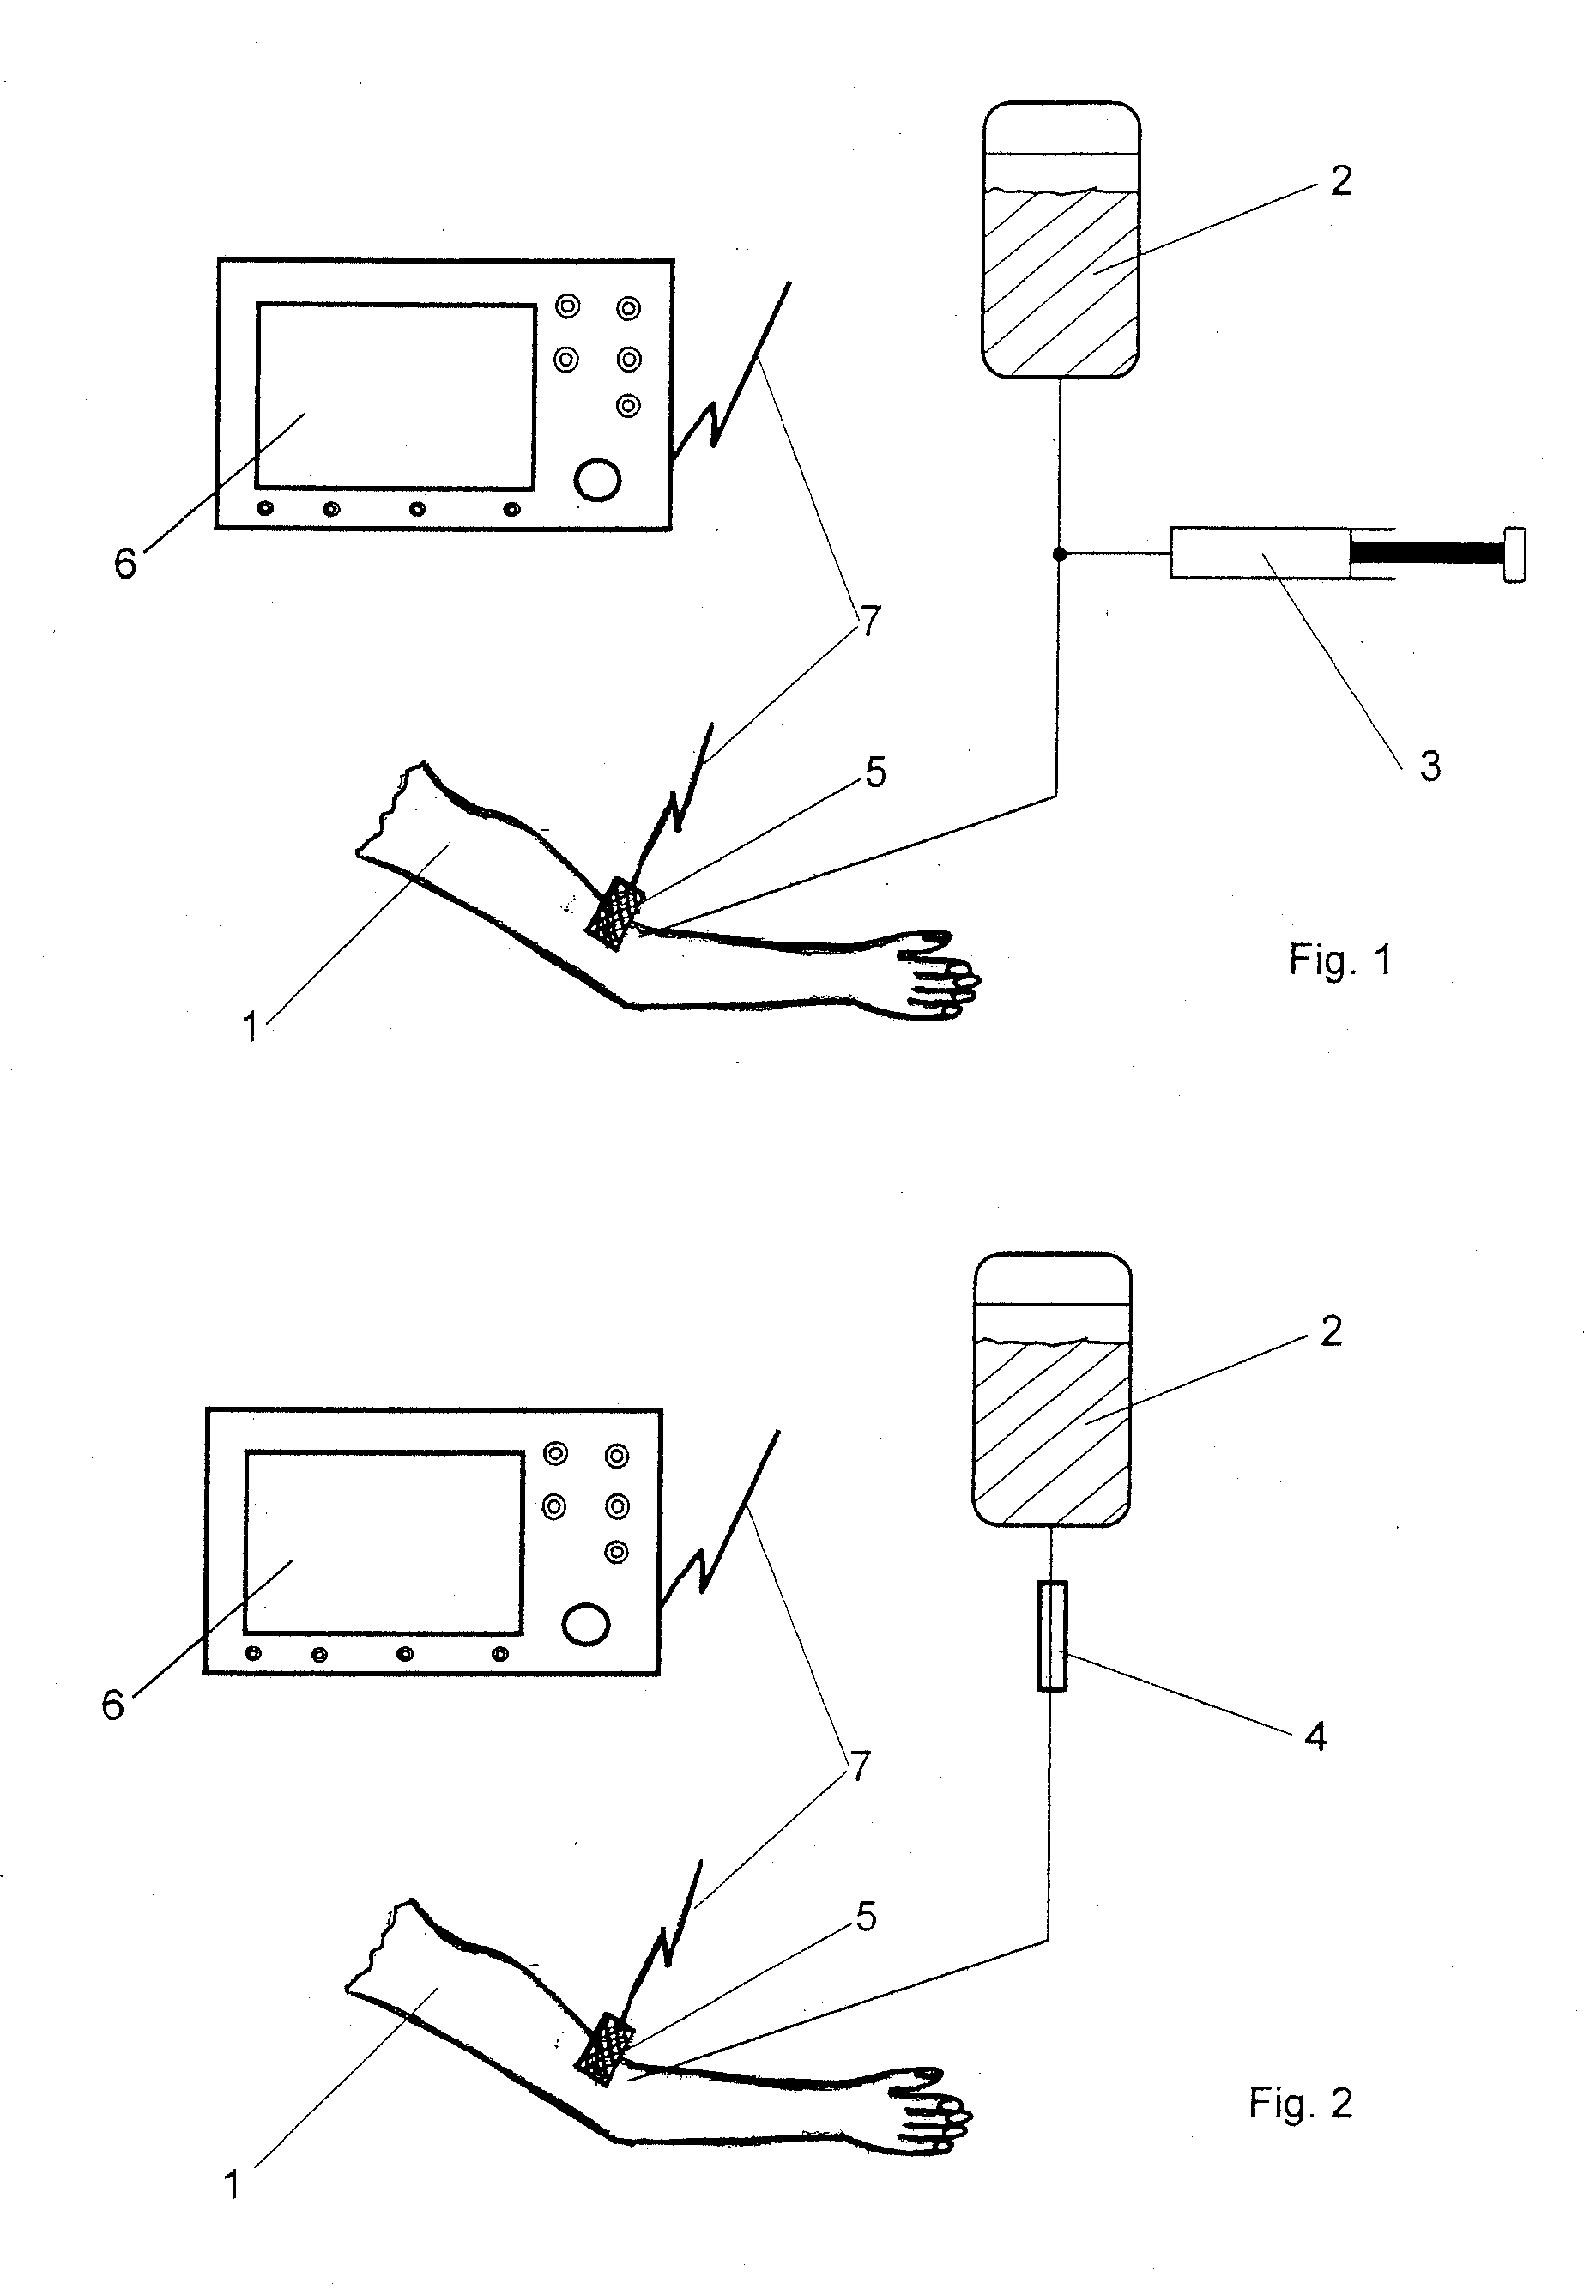 Method and device for monitoring infusions